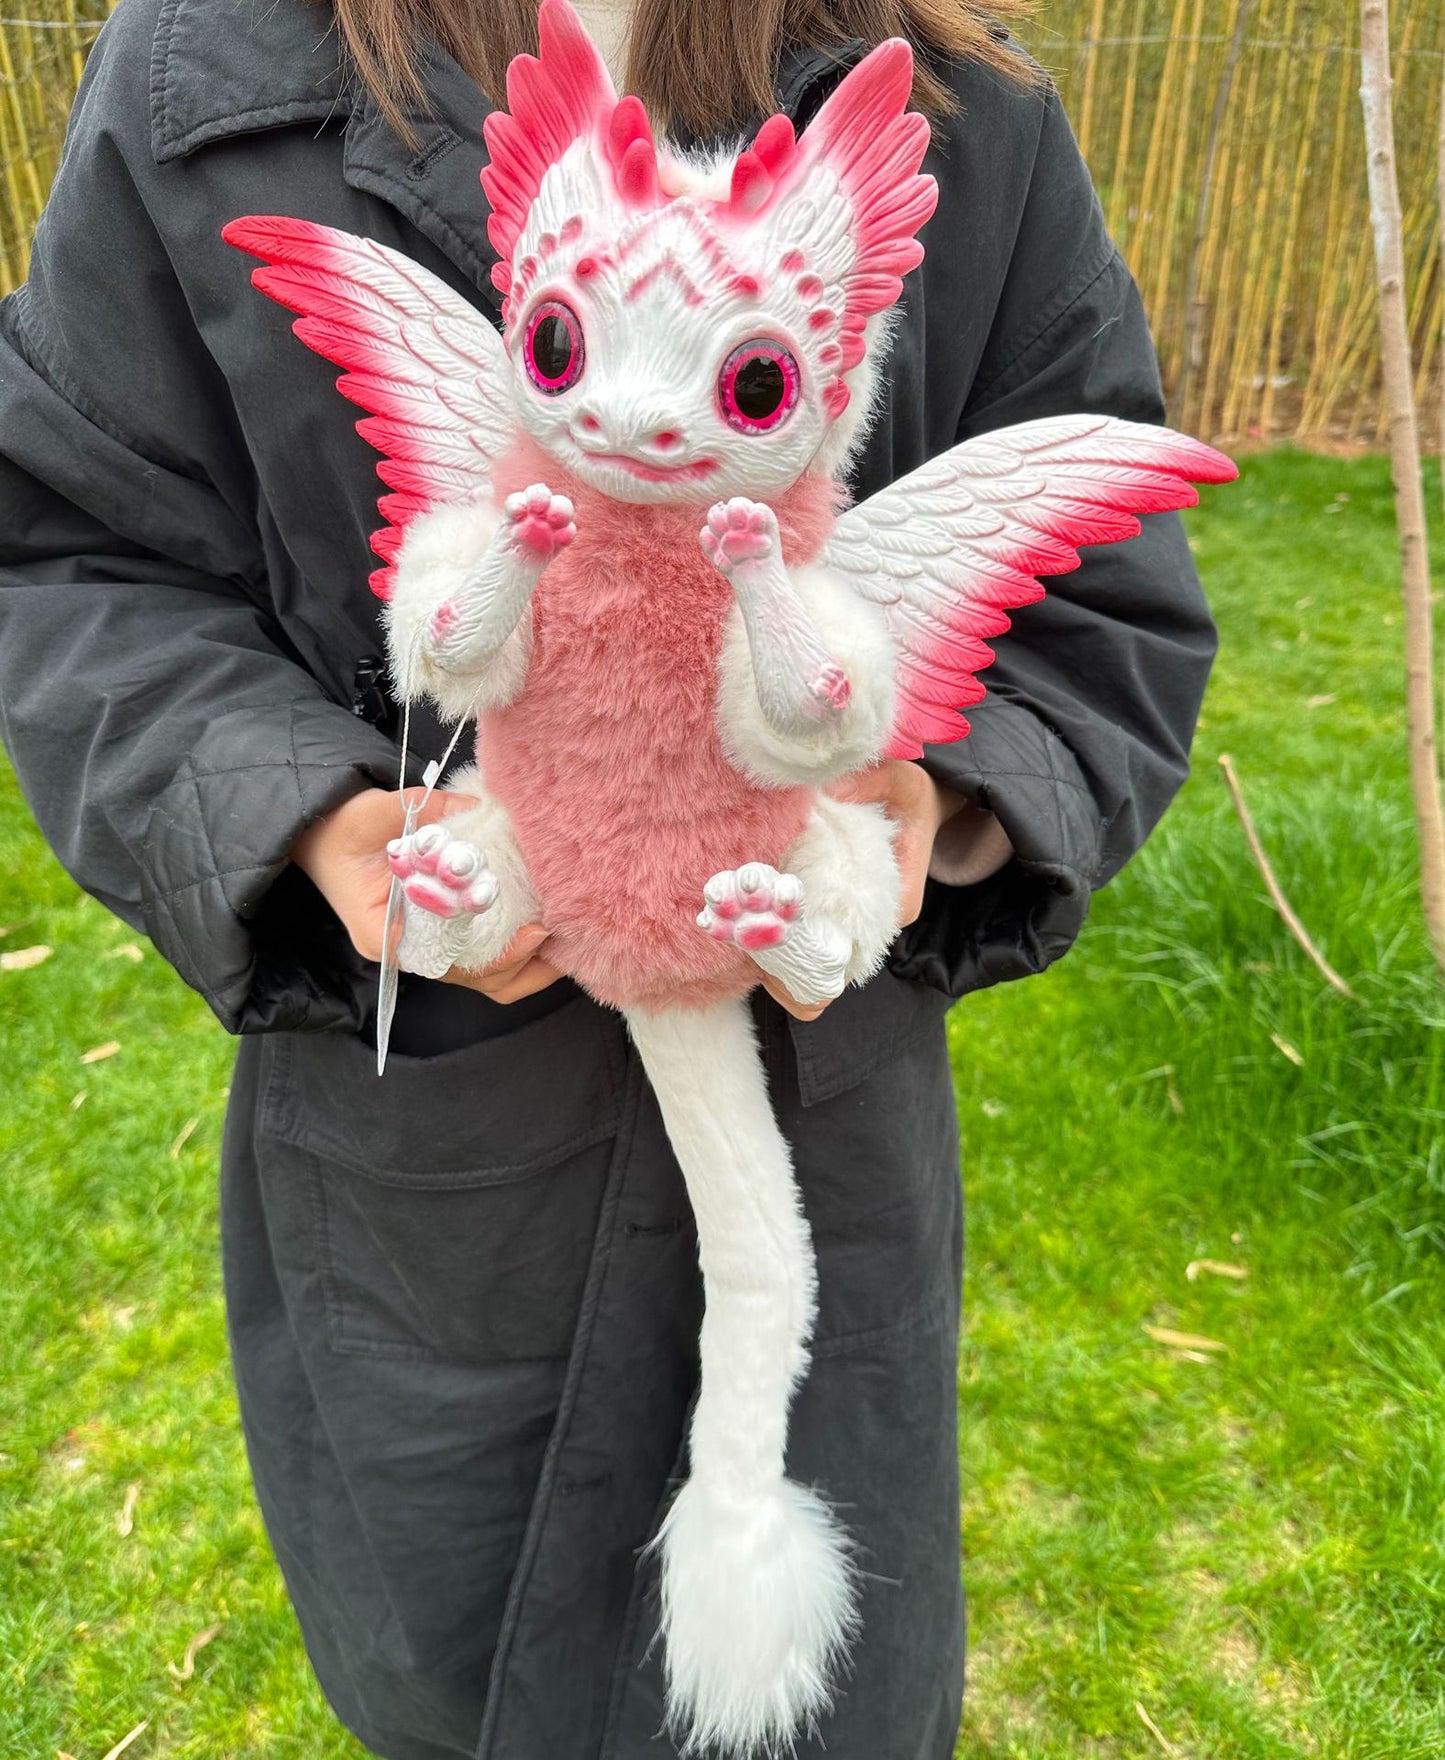 Embark on a Fantasy Journey with Our Majestic Flying Dragon Plush Toy